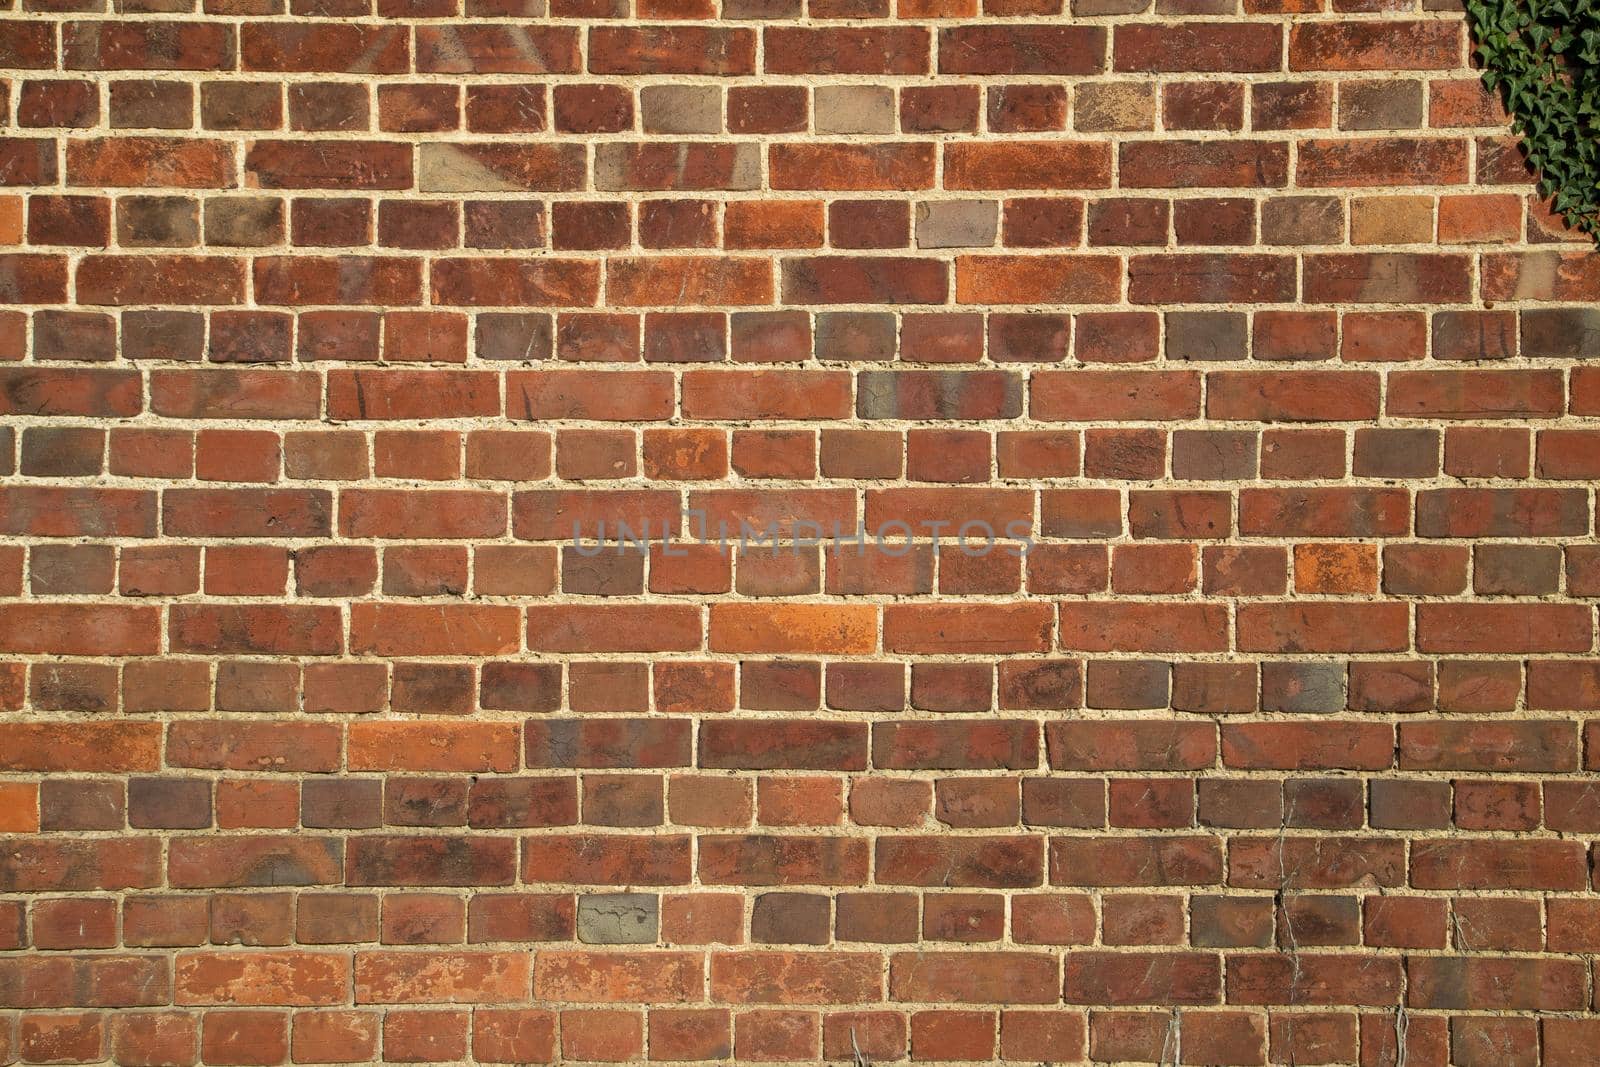 old red brick wall texture background, texture. Distressed grungy wall surface brickwall. Shabby Building Facade. Copy Space.